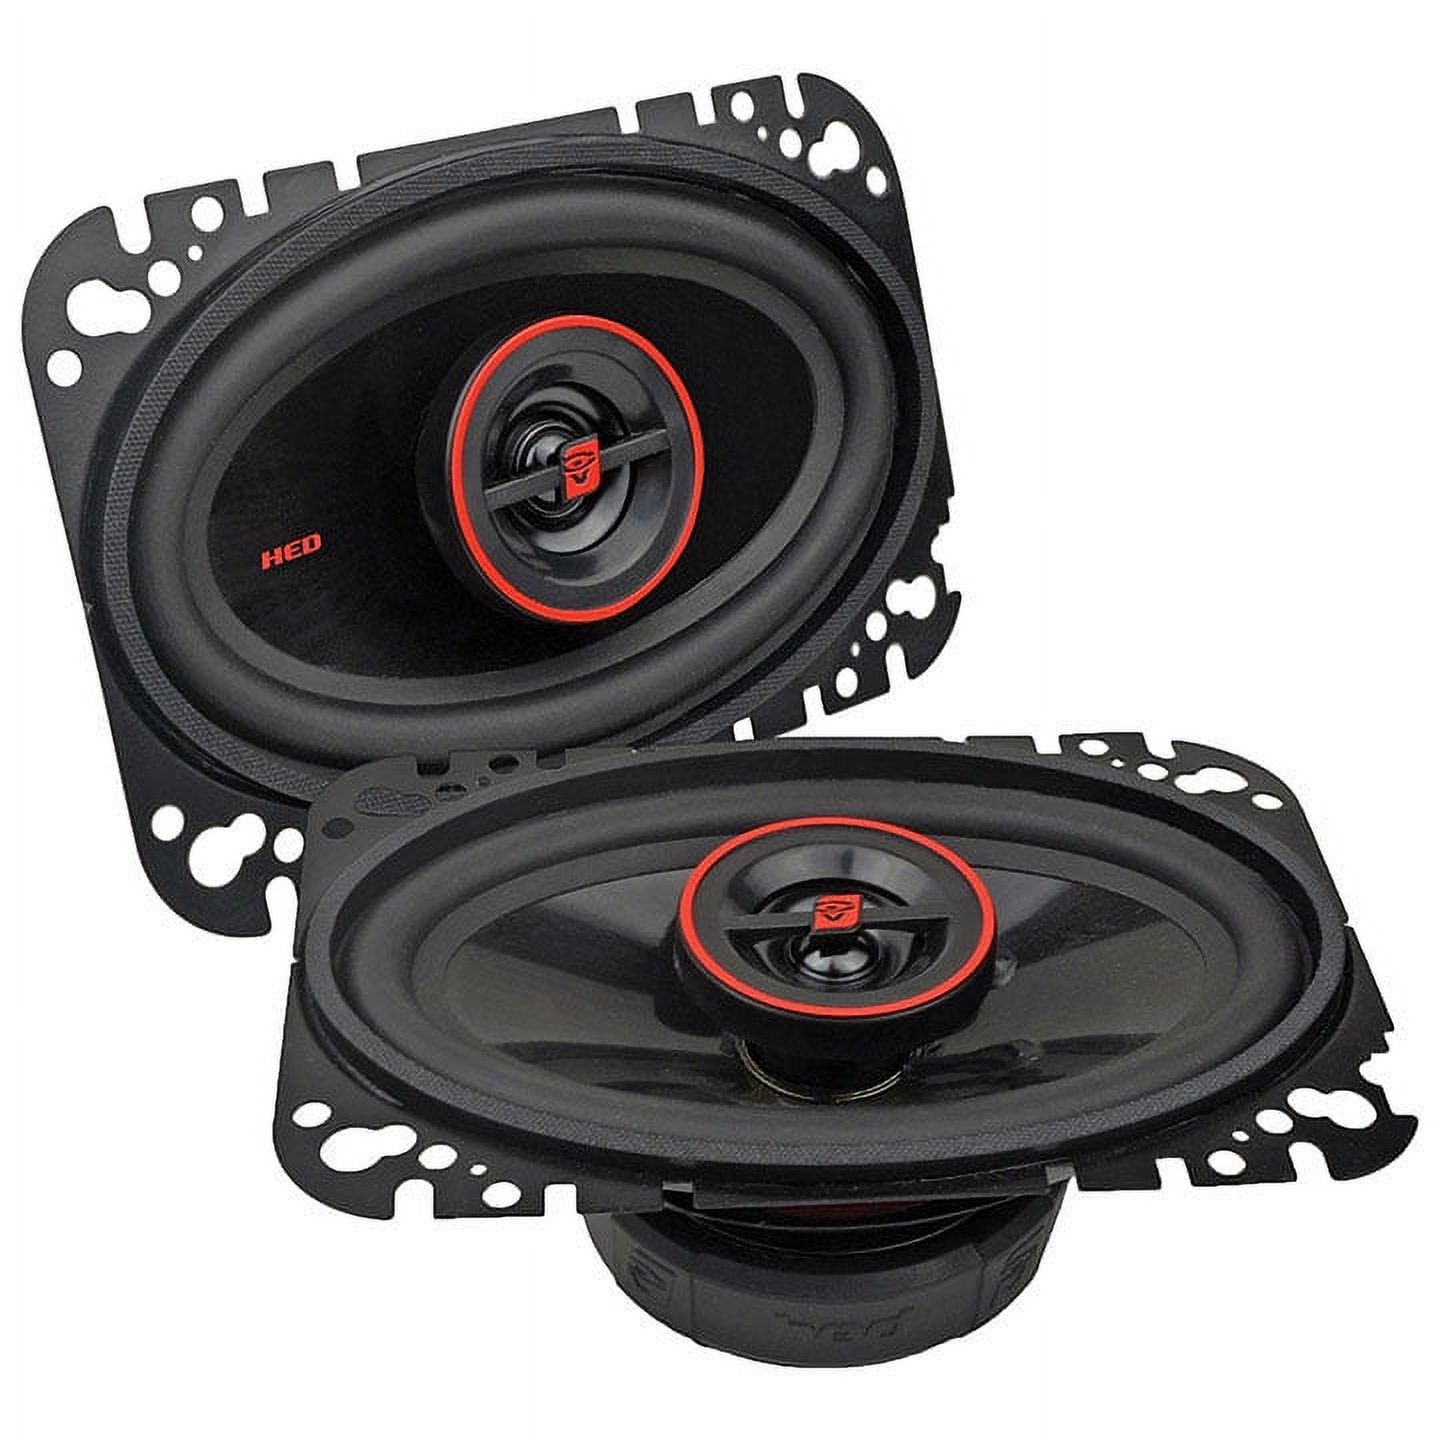 Cerwin-Vega Mobile HED® Series 2-Way Coaxial Speakers (4" x 6", 275 Watts max) - image 1 of 3